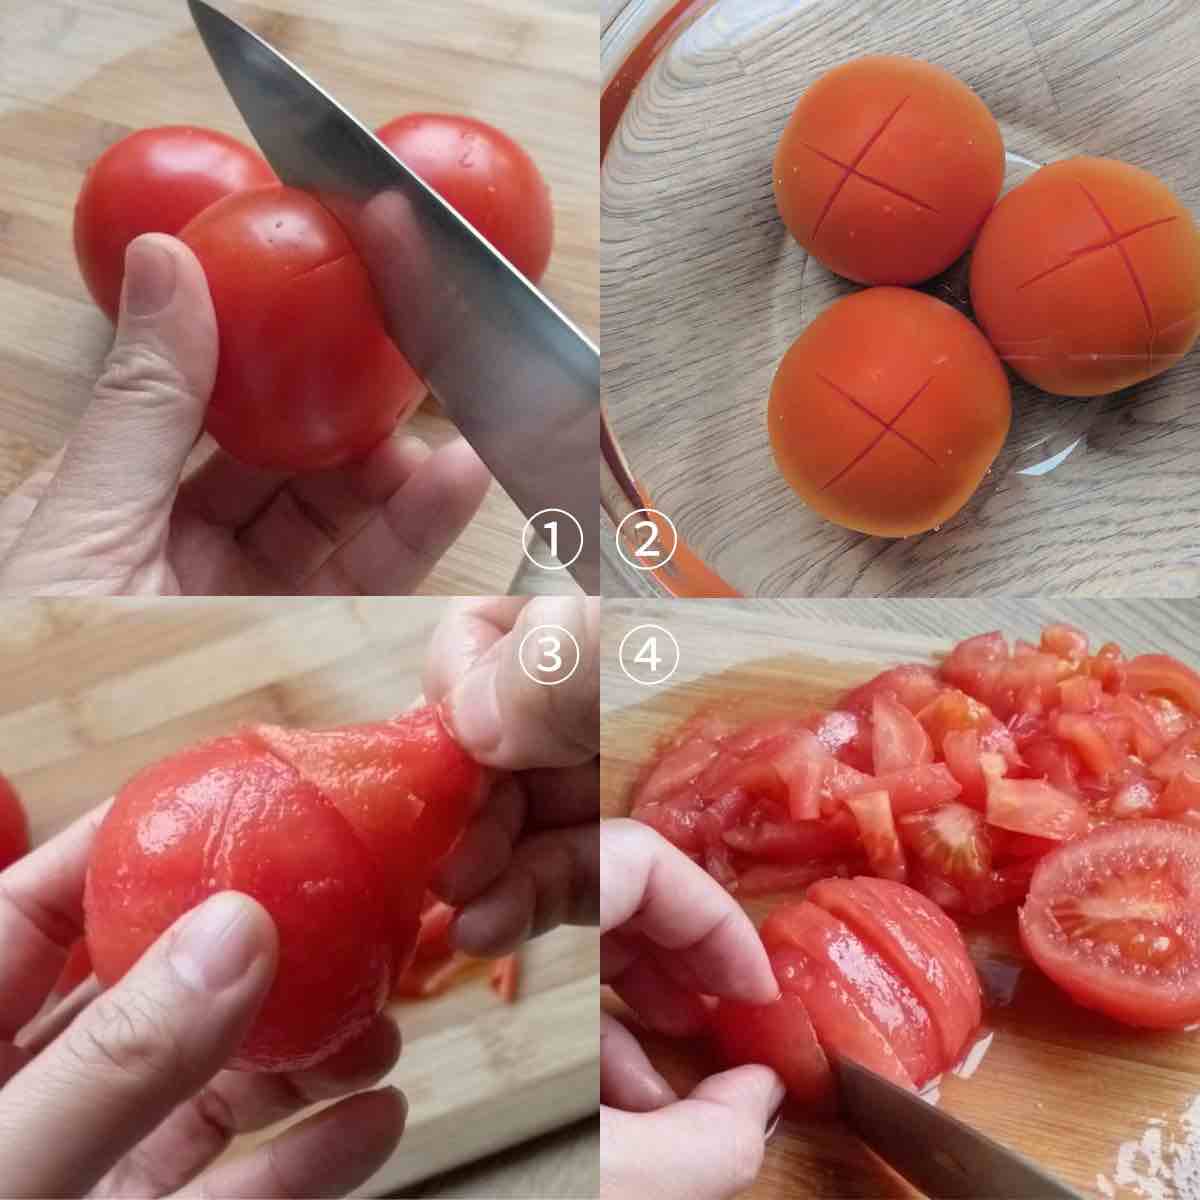 peeling and cutting tomatoes.